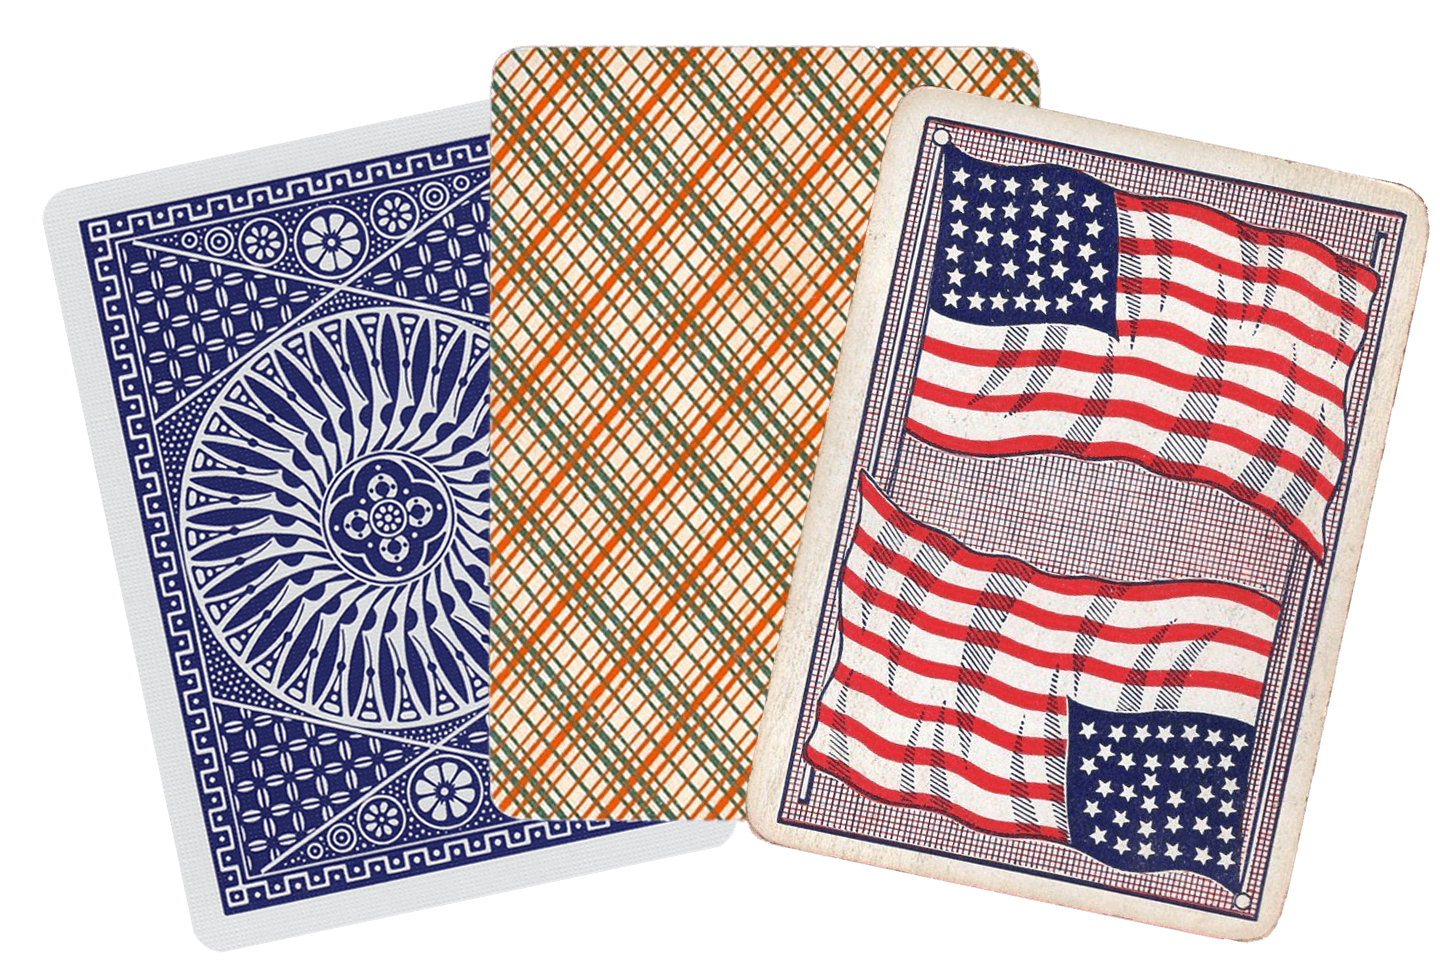 Excelsior, Steamboat, Triplicate, Tally-Ho, Outing, etc. were some of Andrew Dougherty's playing card brands.